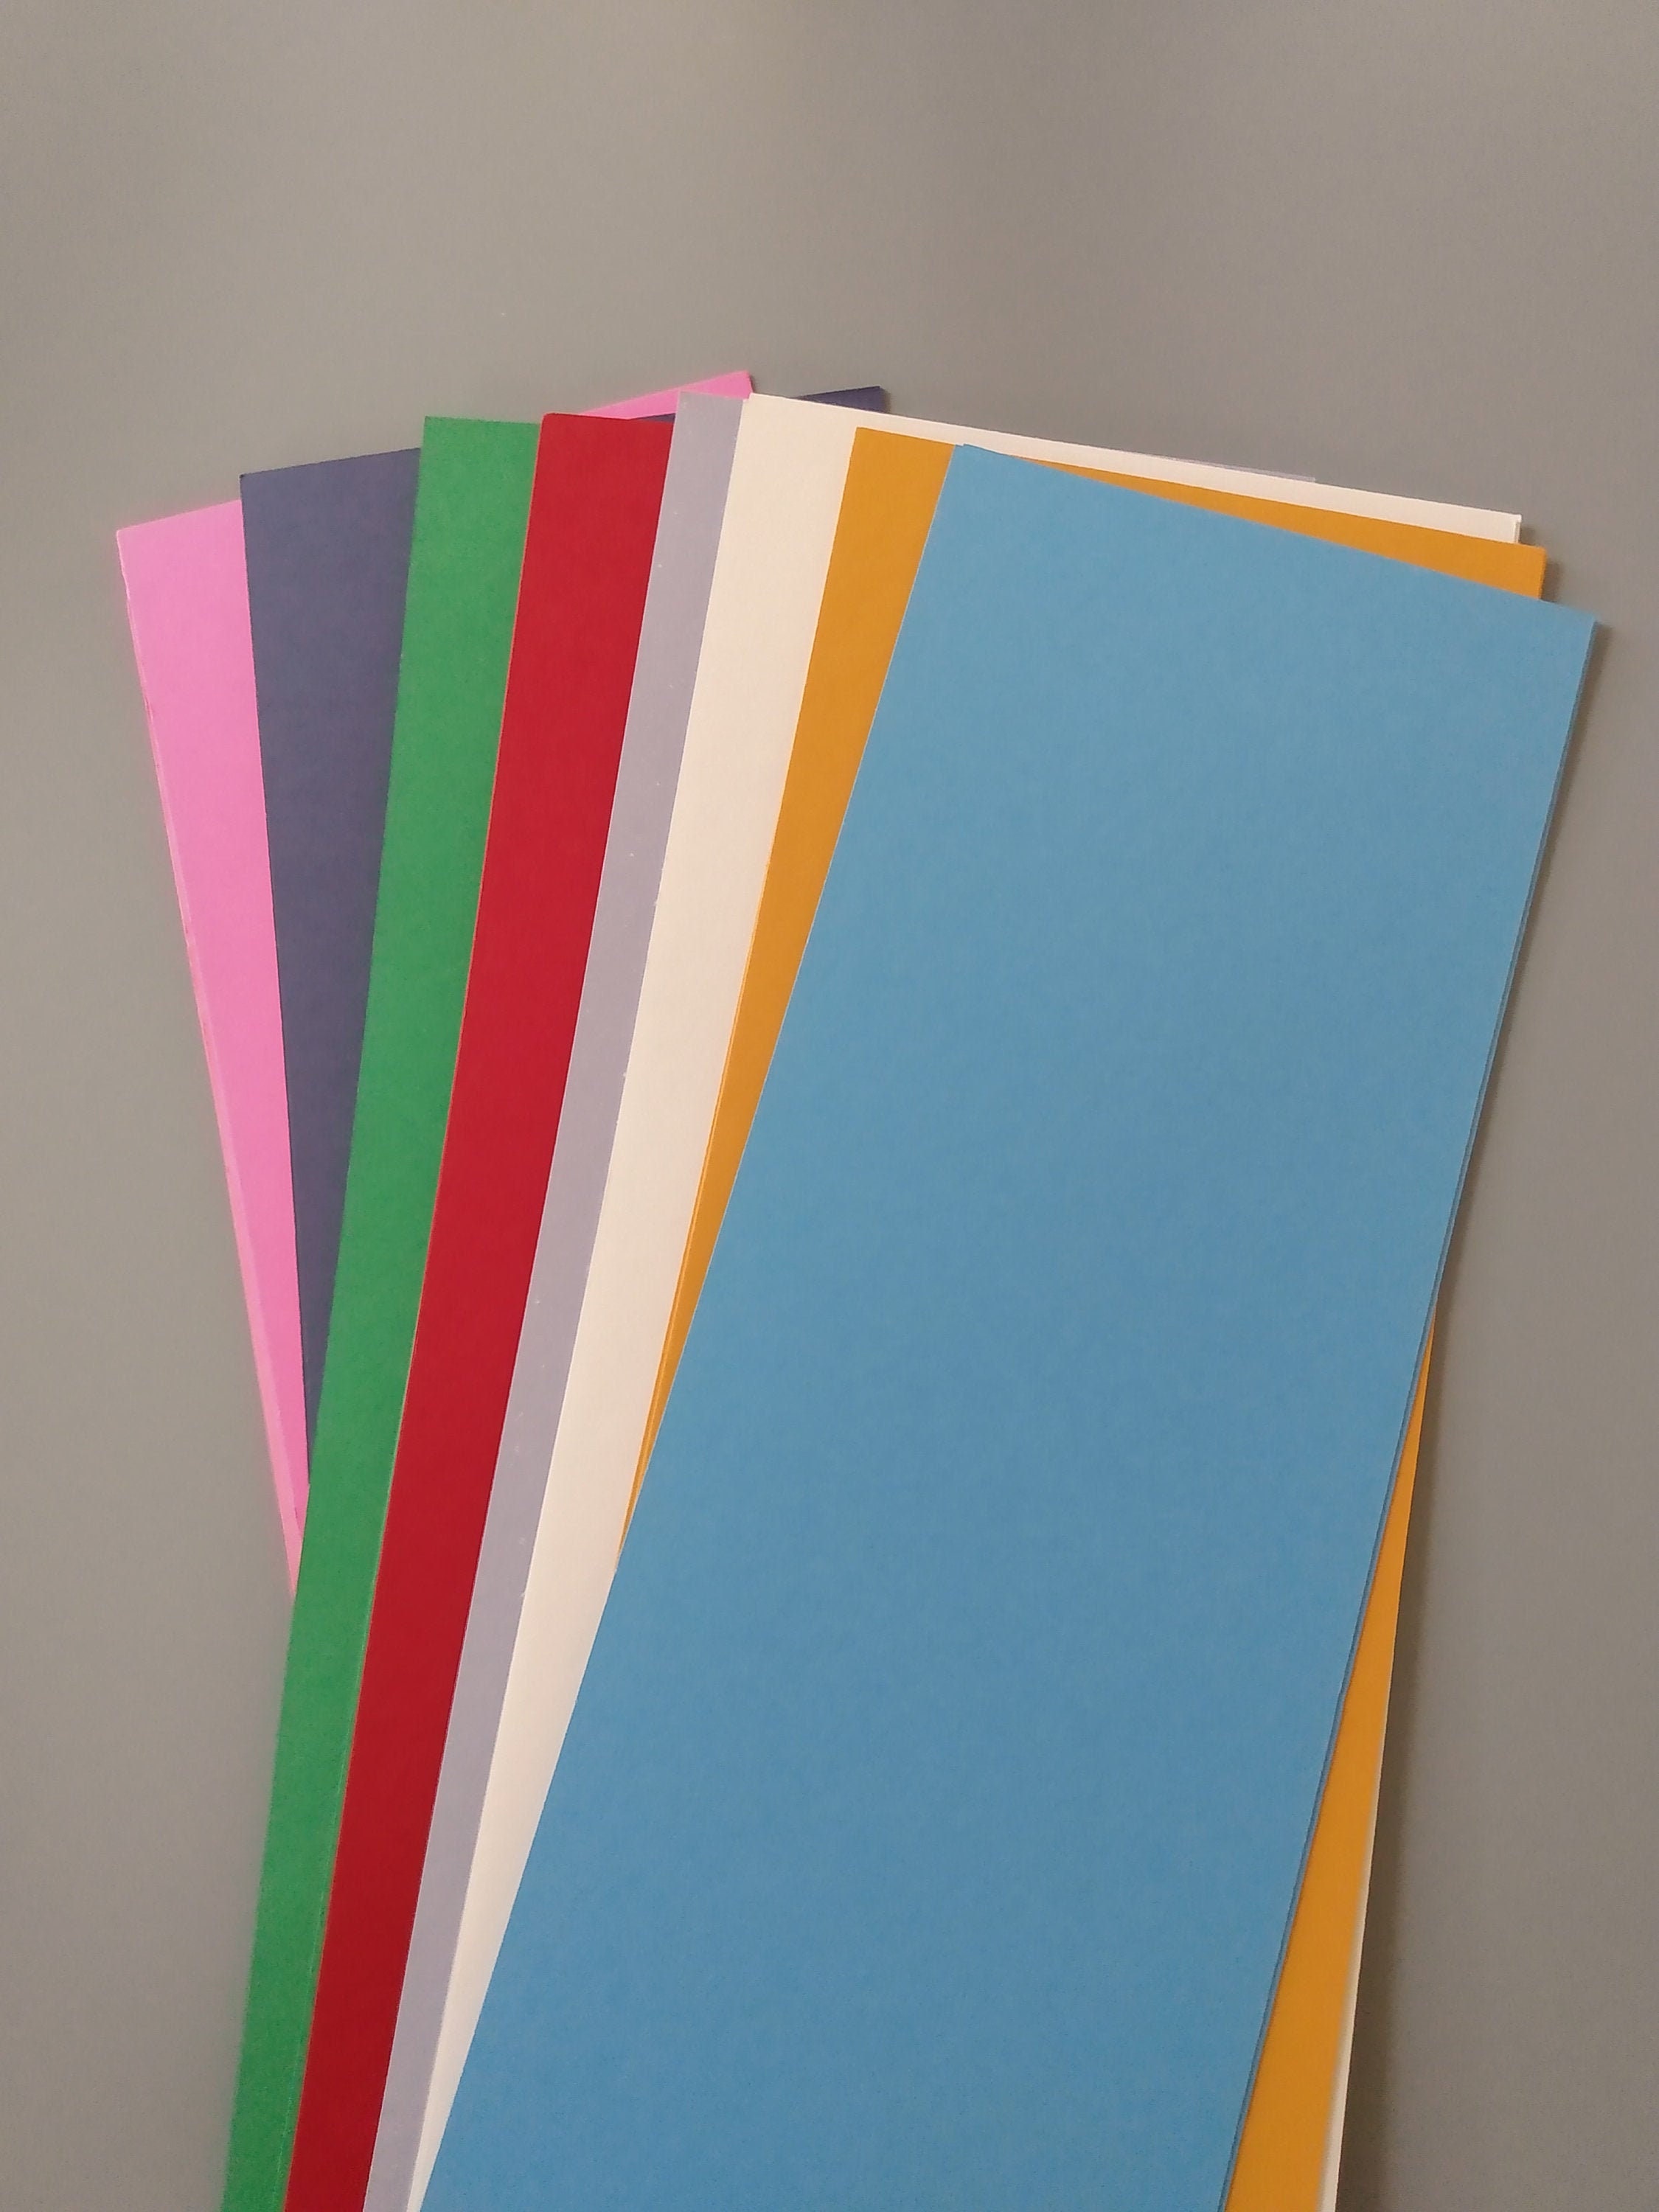 Silver and Blues Cardstock Set of 50 Pages 65lb Color Cardstock 